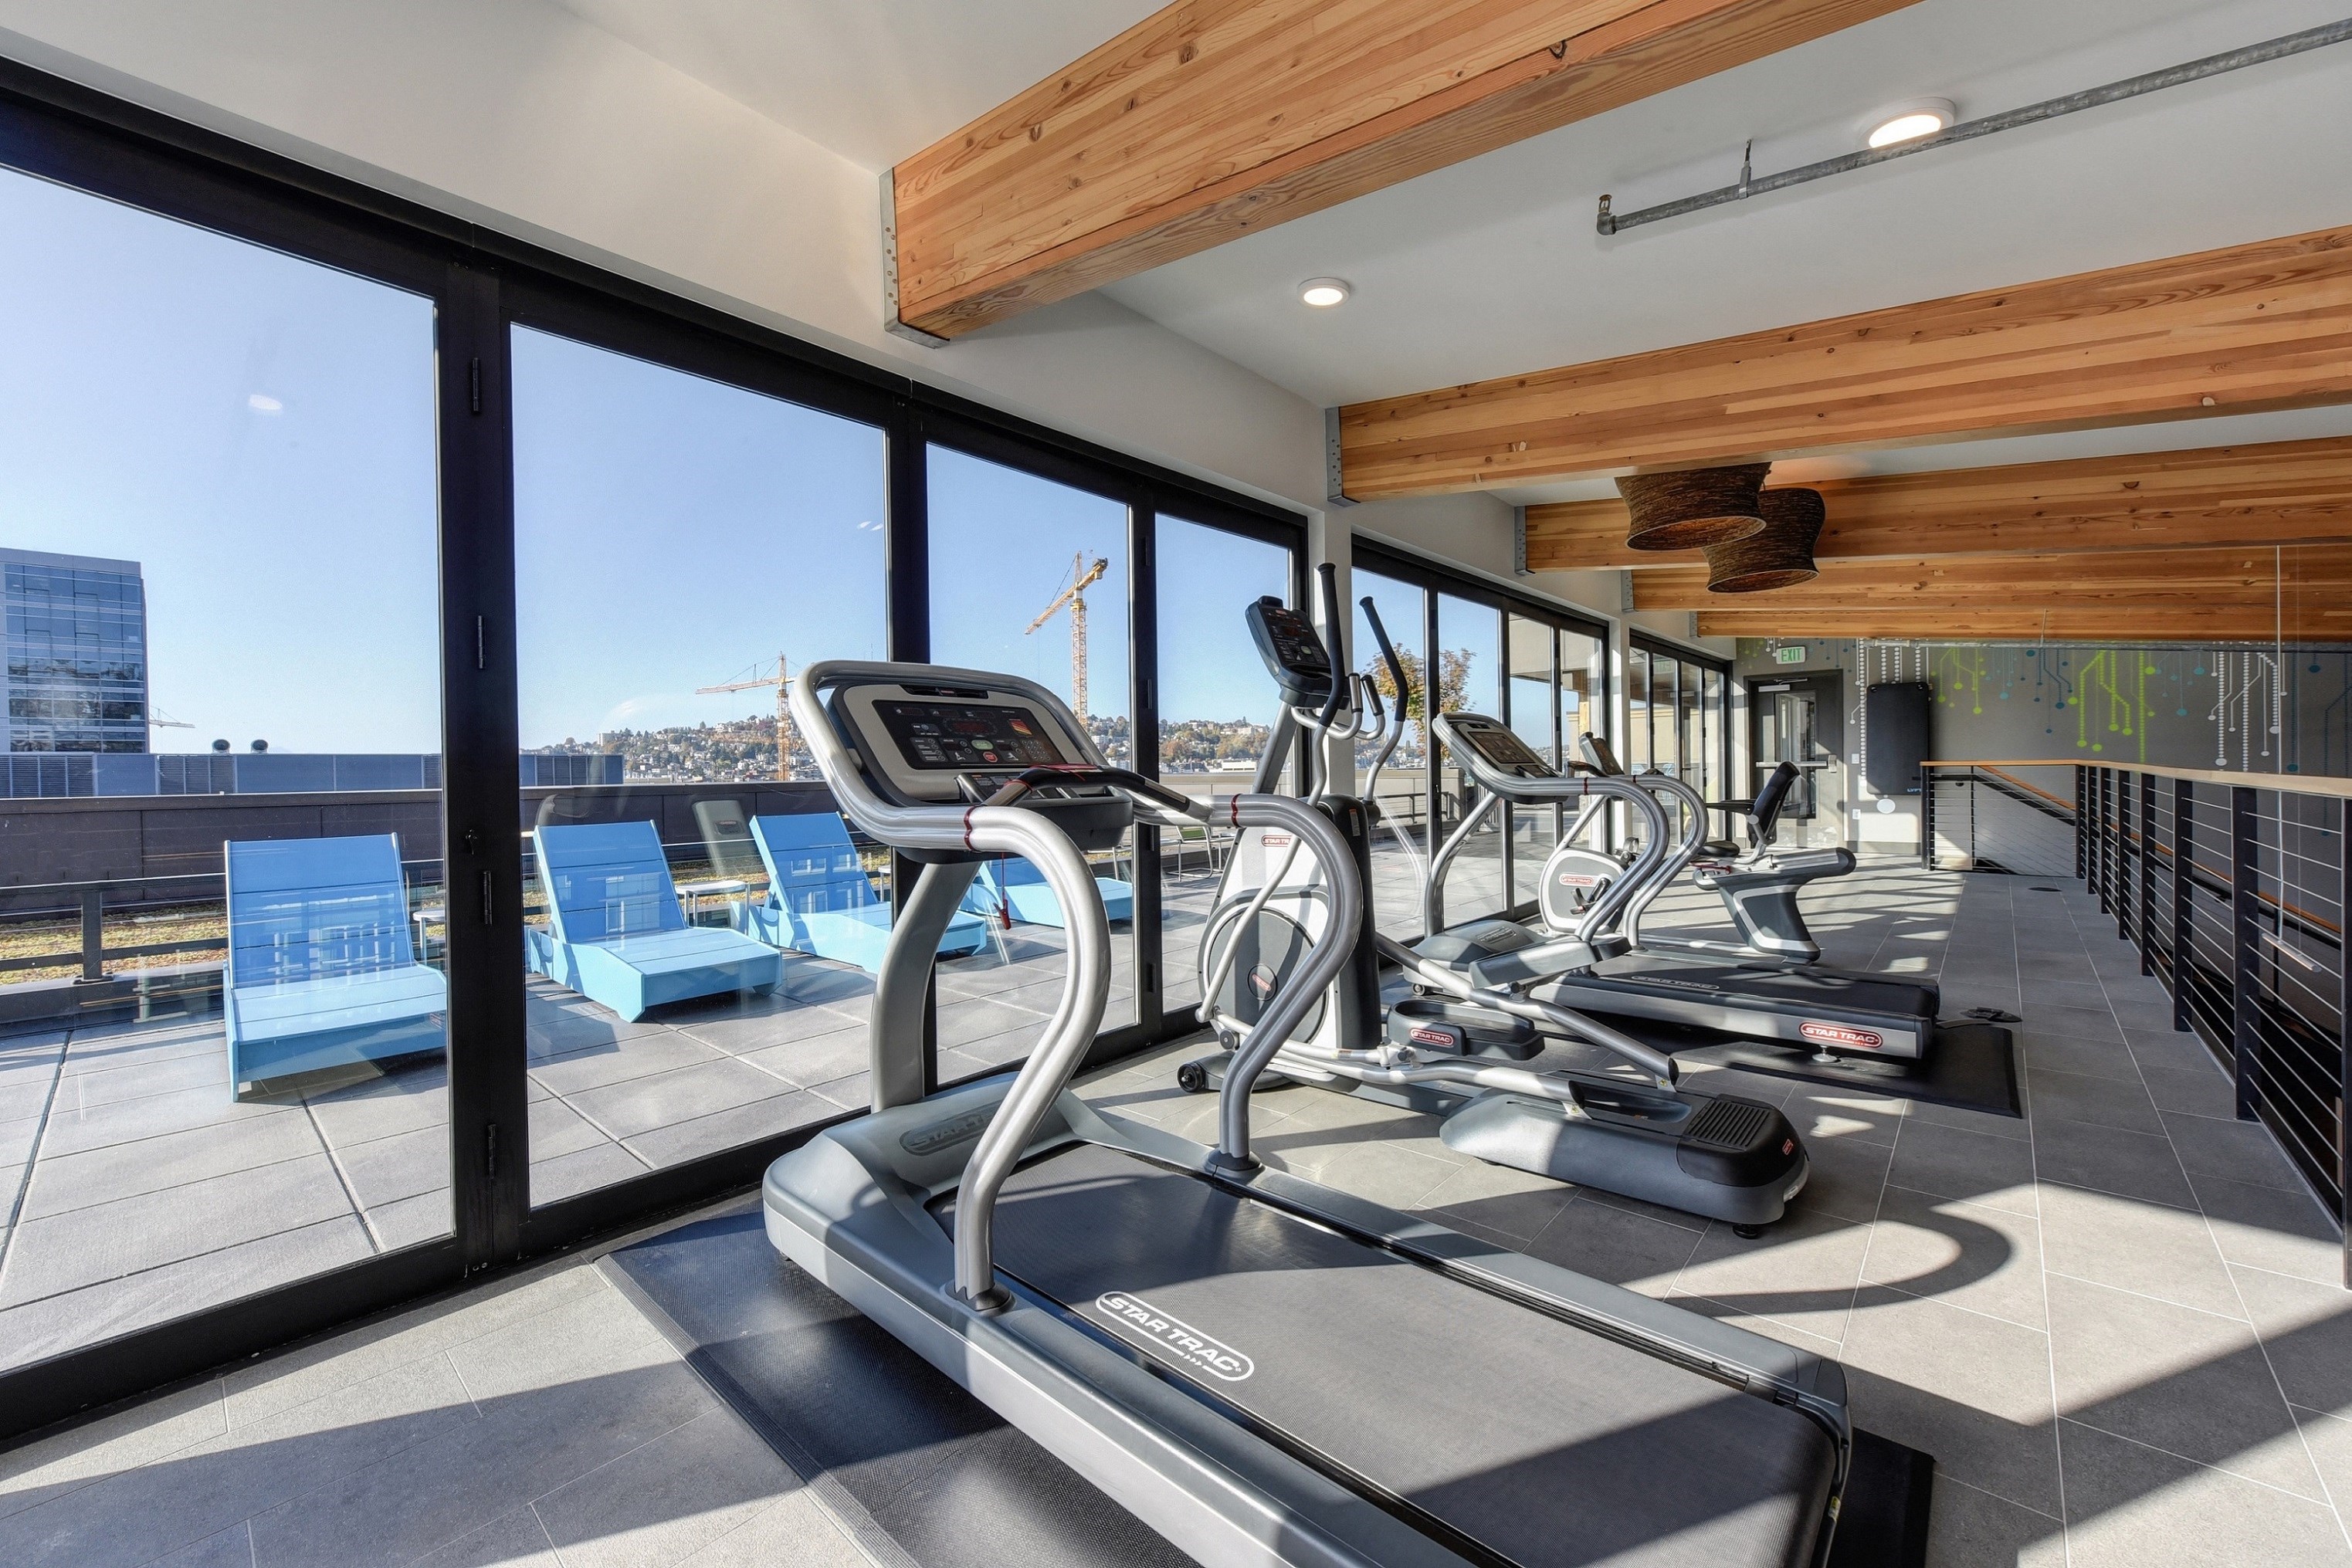 Fitness Center with Treadmills, Ellipticals, and View of Blue Lounge Chairs through Window